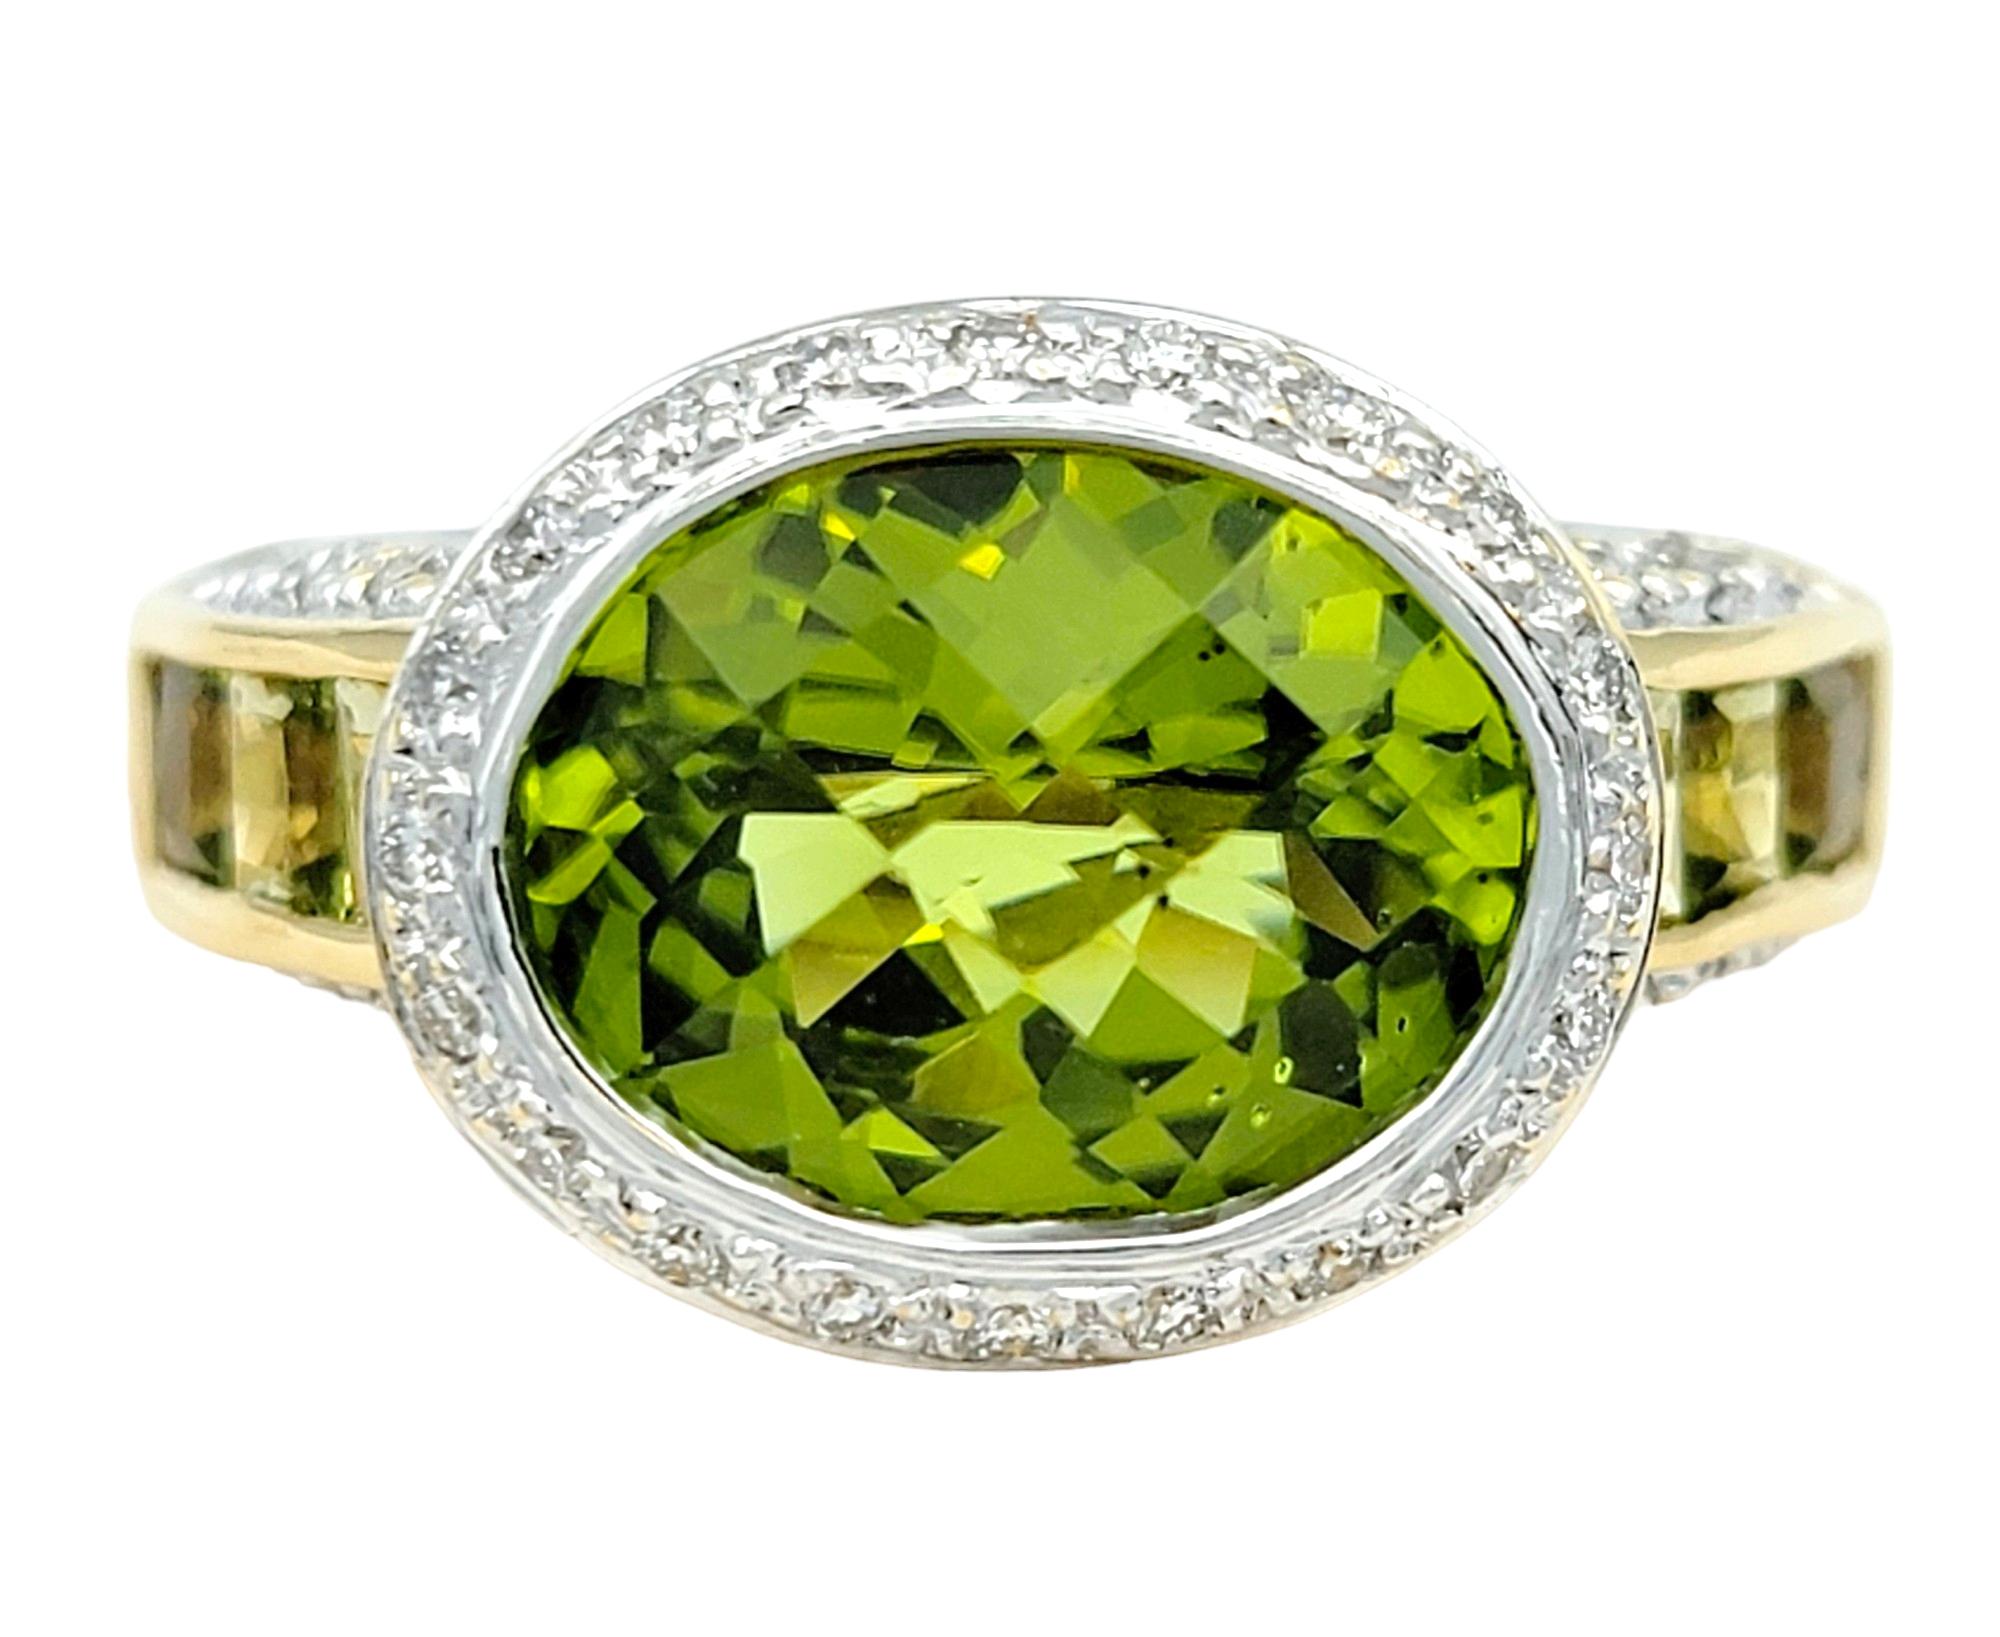 Ring Size: 7

This stunning Bellarri peridot and diamond ring, set in lustrous 18 karat yellow gold, is a mesmerizing piece of fine jewelry that captures the essence of elegance and sophistication. At the heart of the ring lies a striking large oval